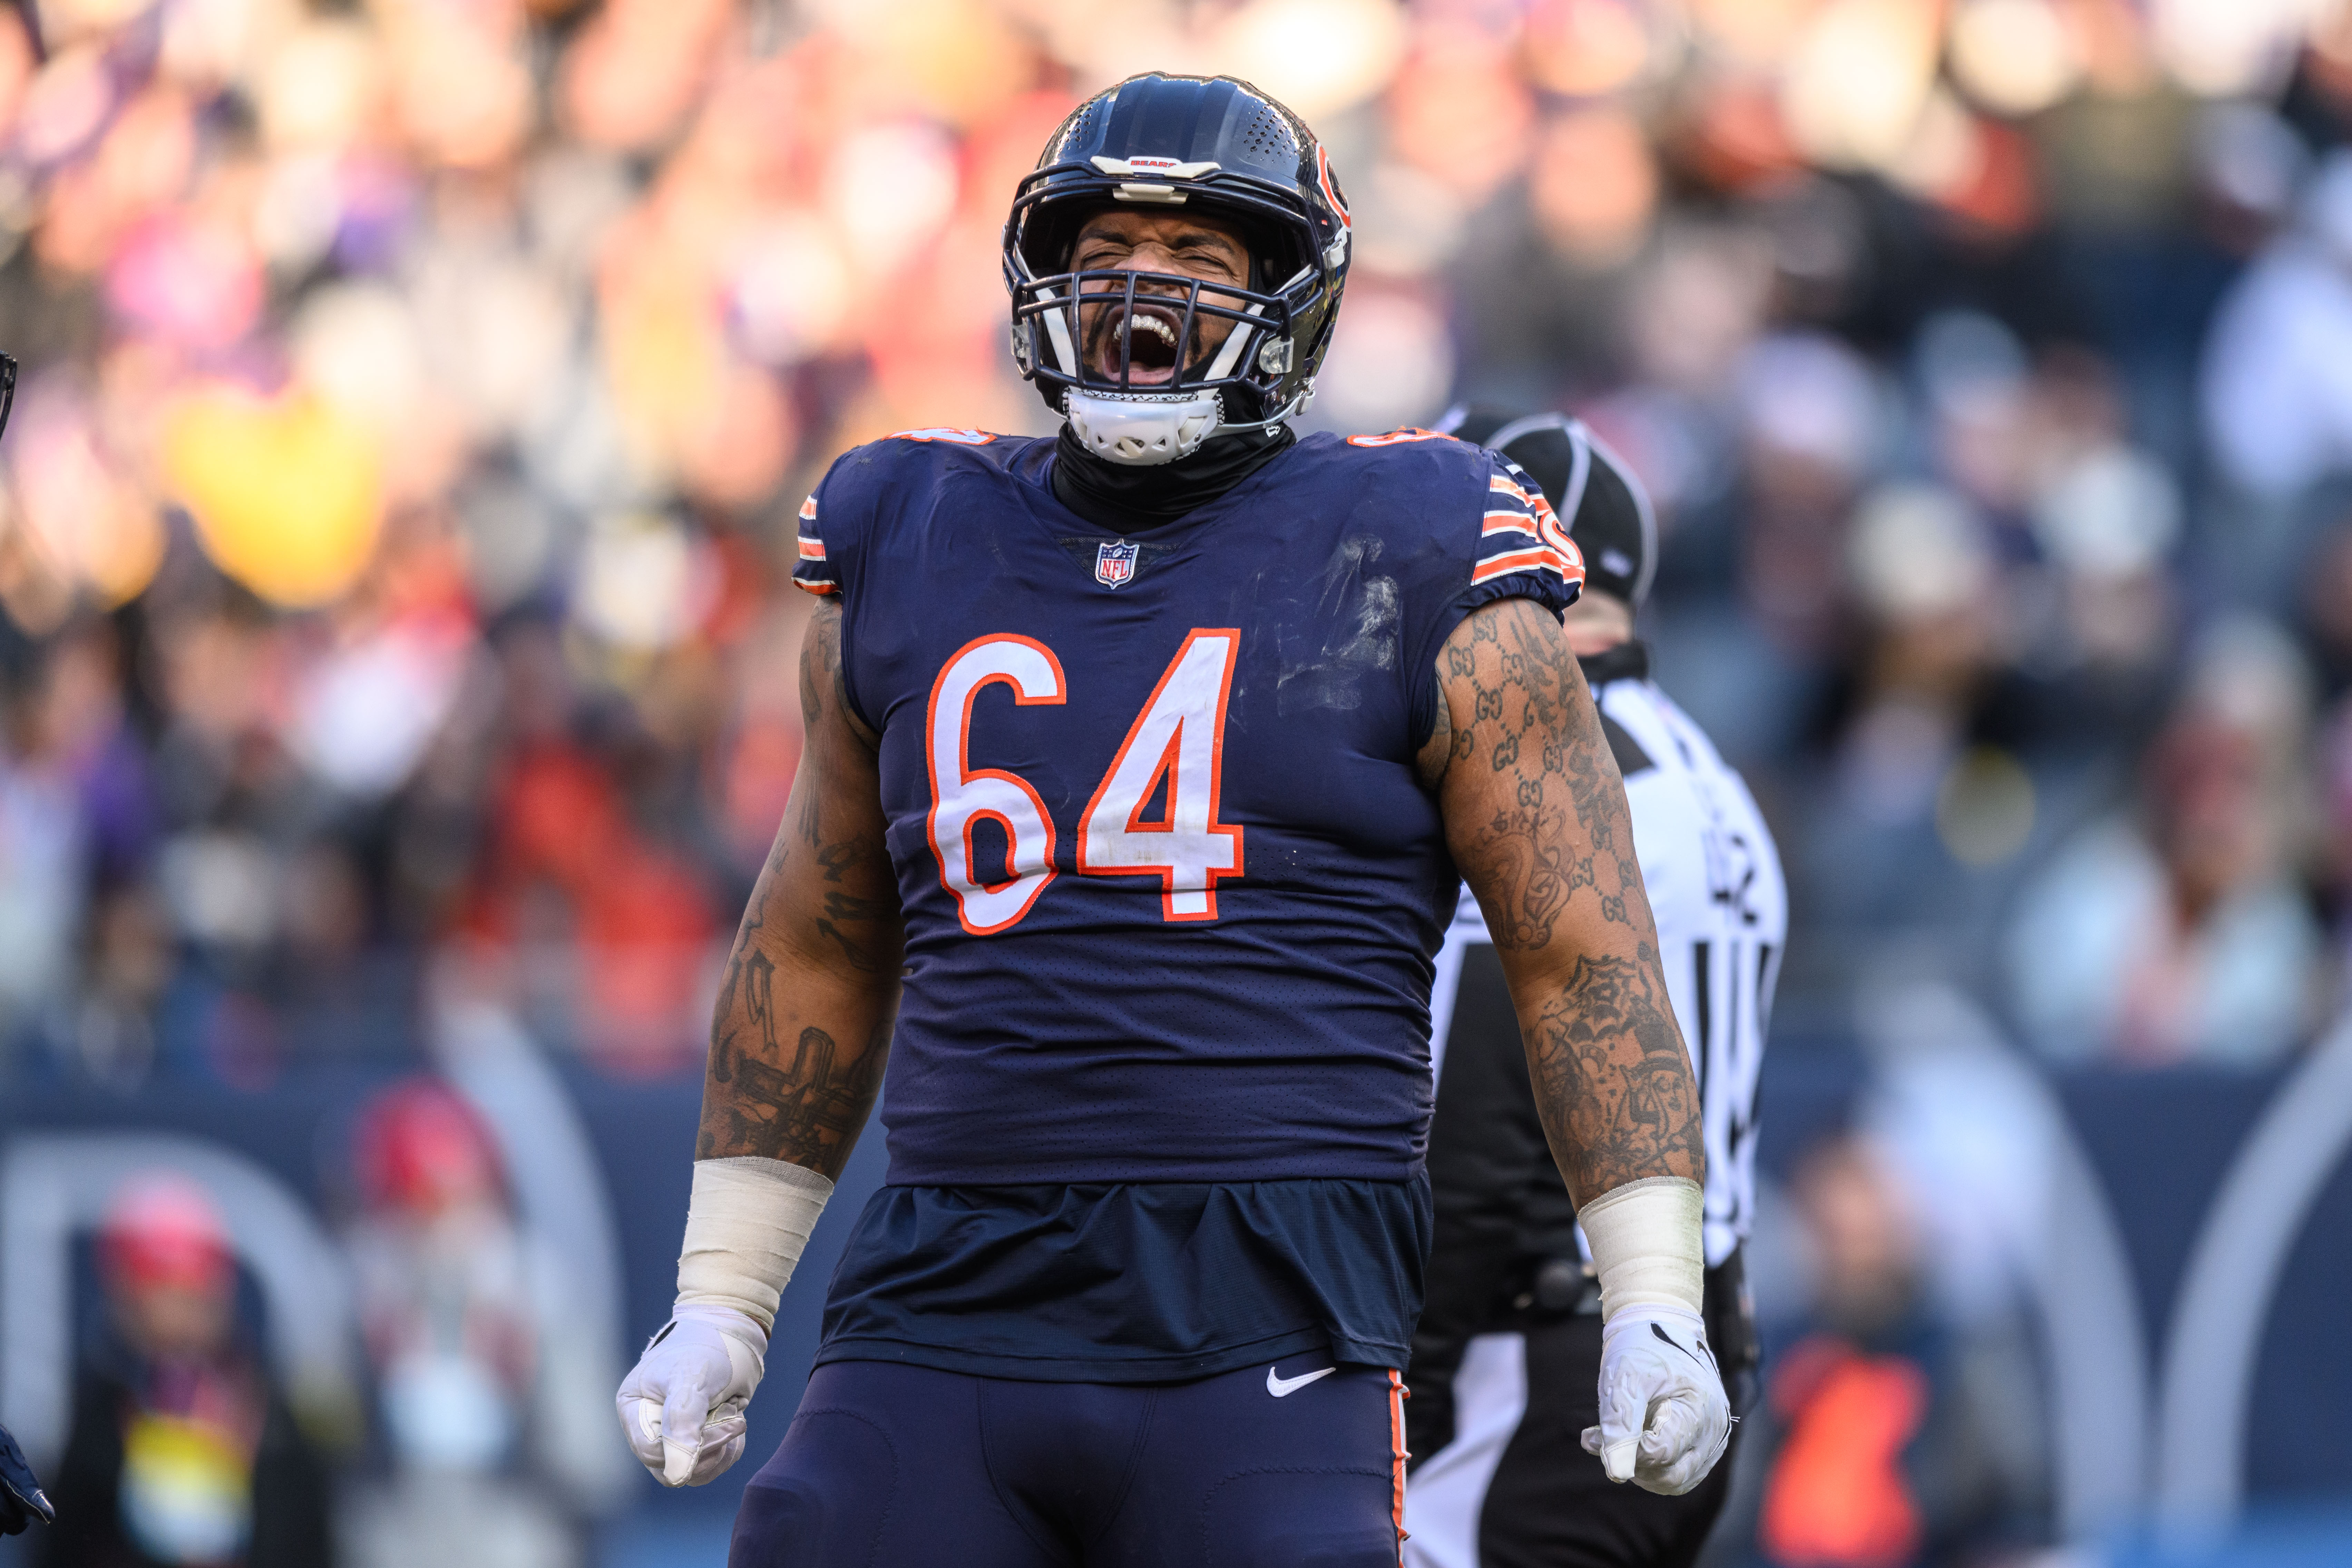 Bears 2023 free agency preview: Will Mike Pennel be back in rotational role?